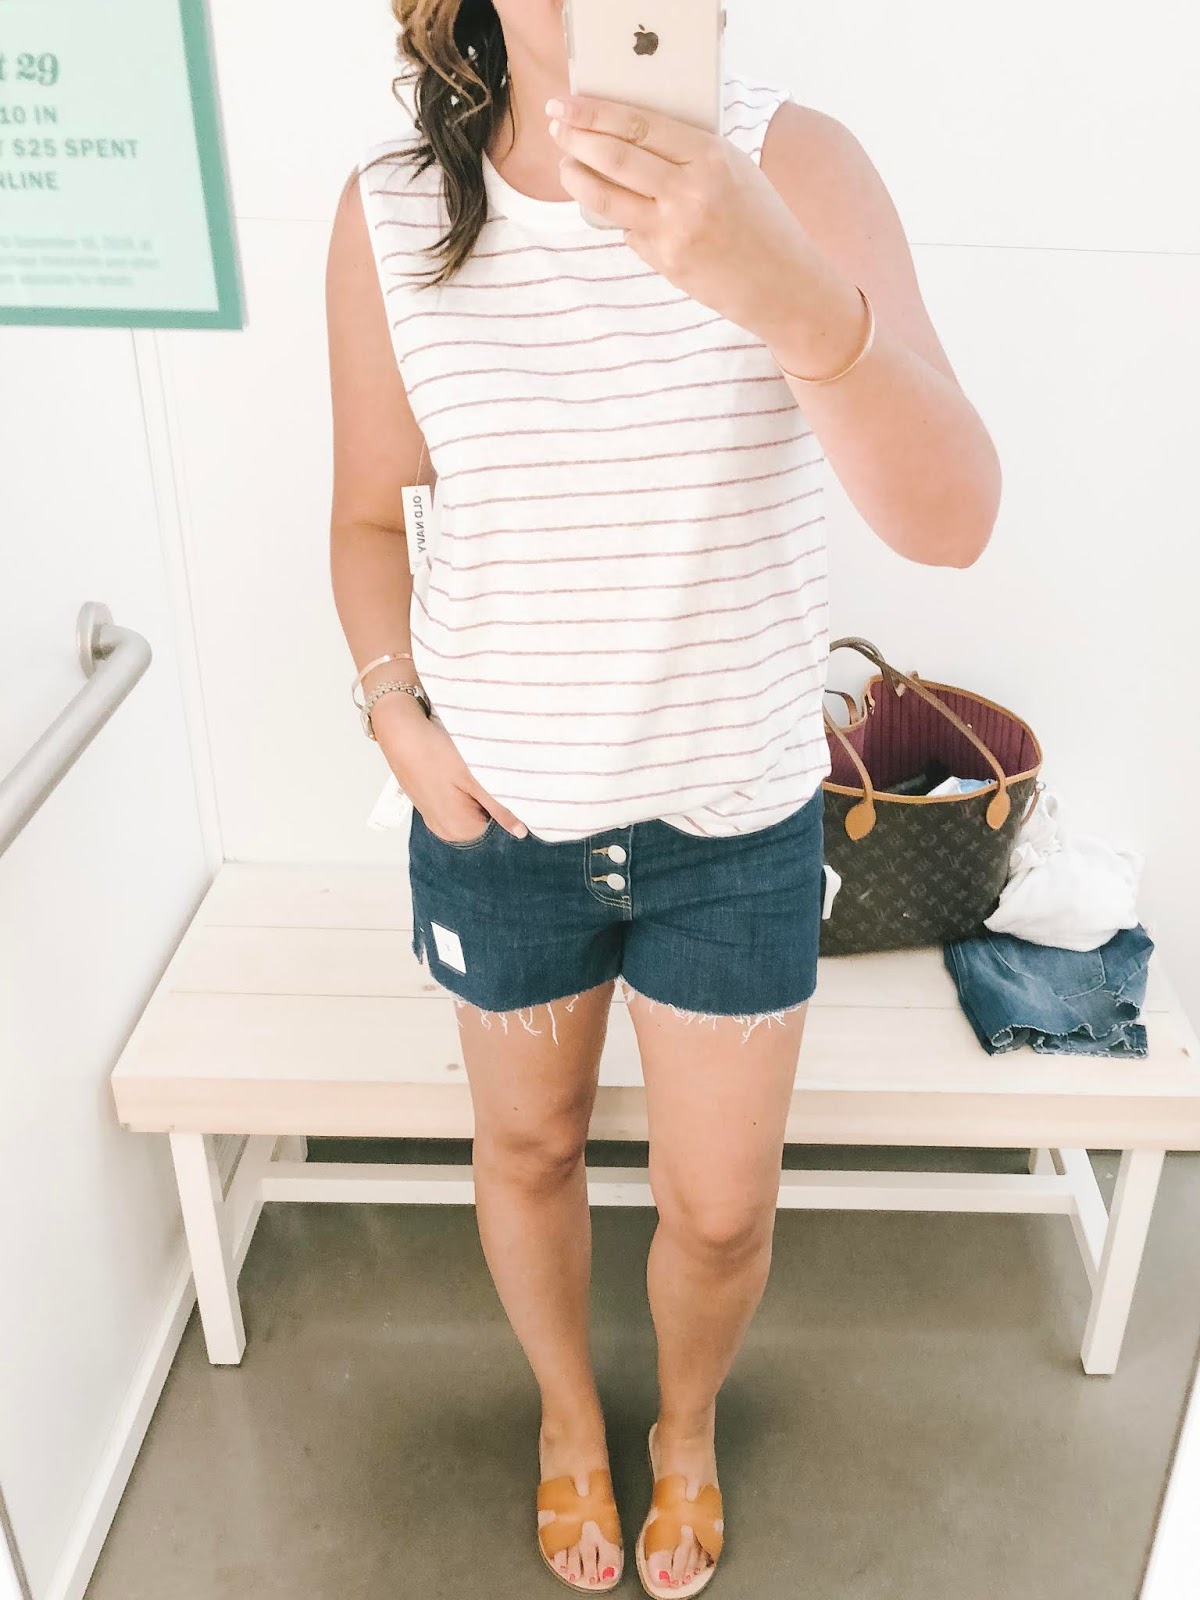 The Best Denim Shorts For All Bodies